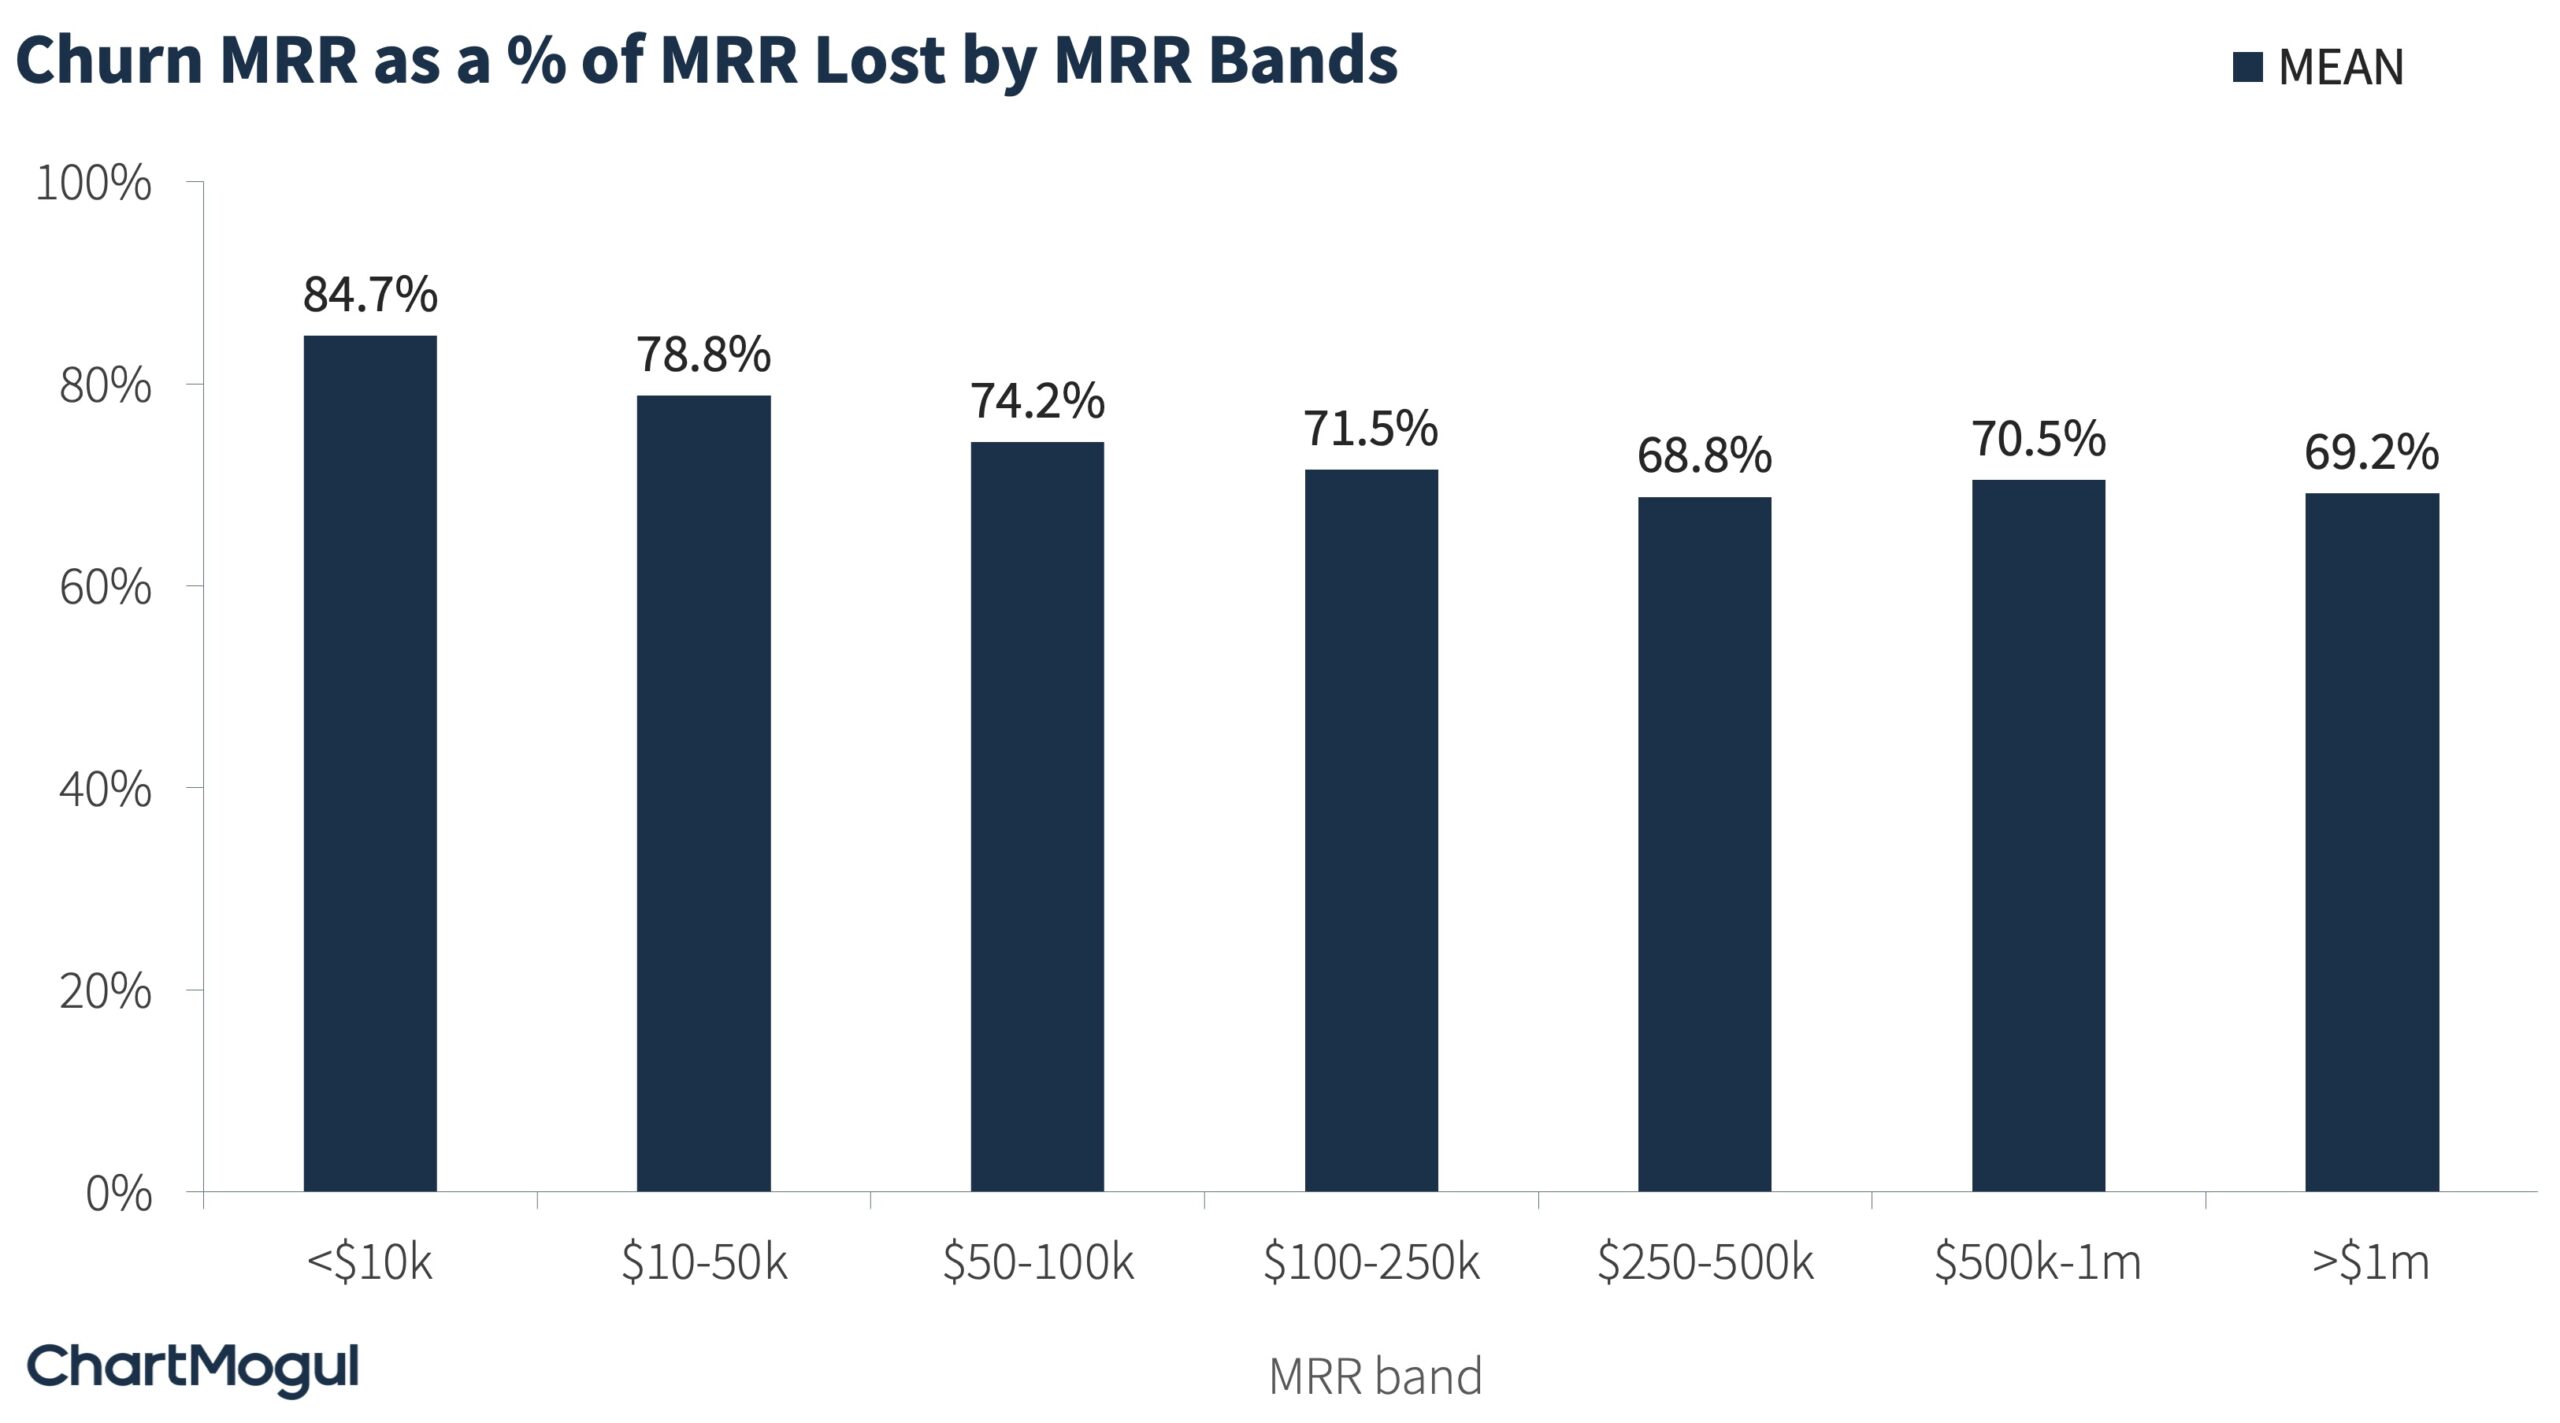 Churn MRR as a % of MRR Lost